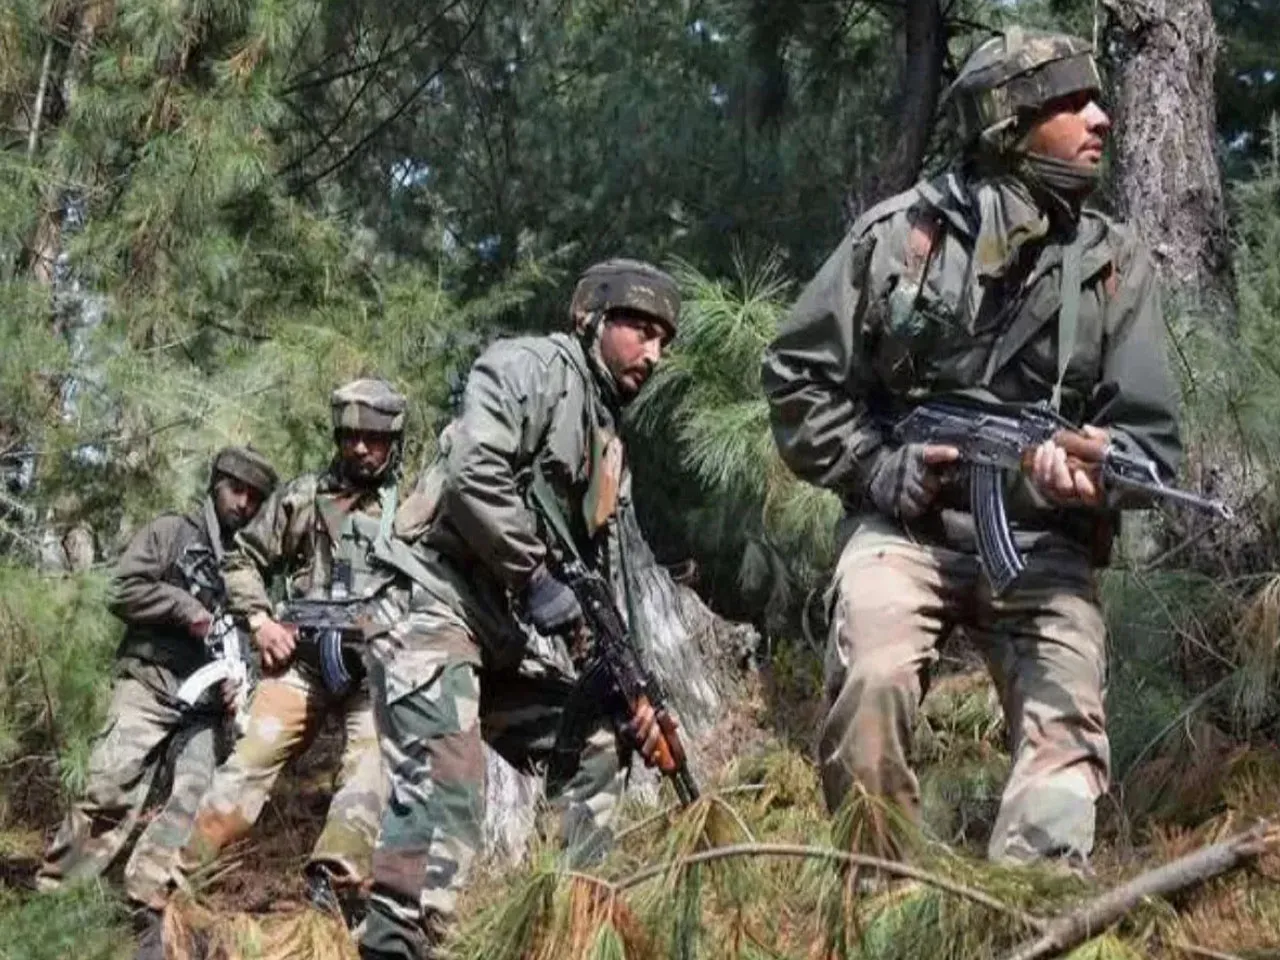 J&K encounter: One more soldier has lost his life